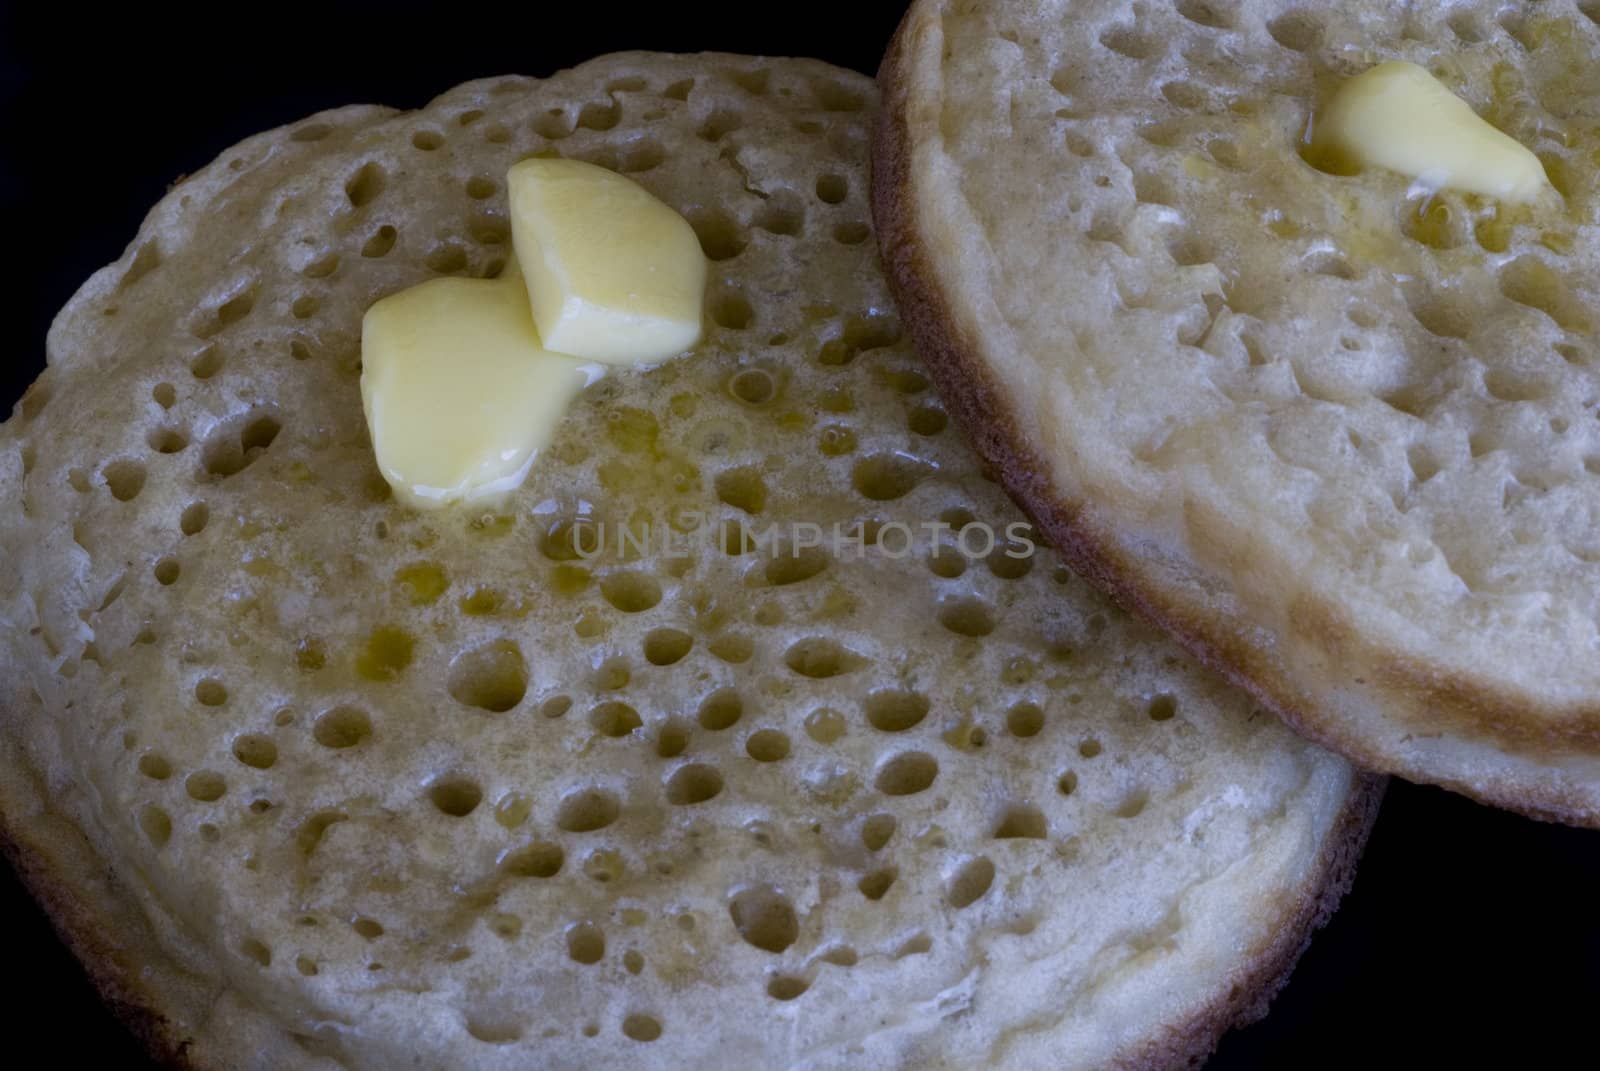 two buttered crumpets, isolated on a black background